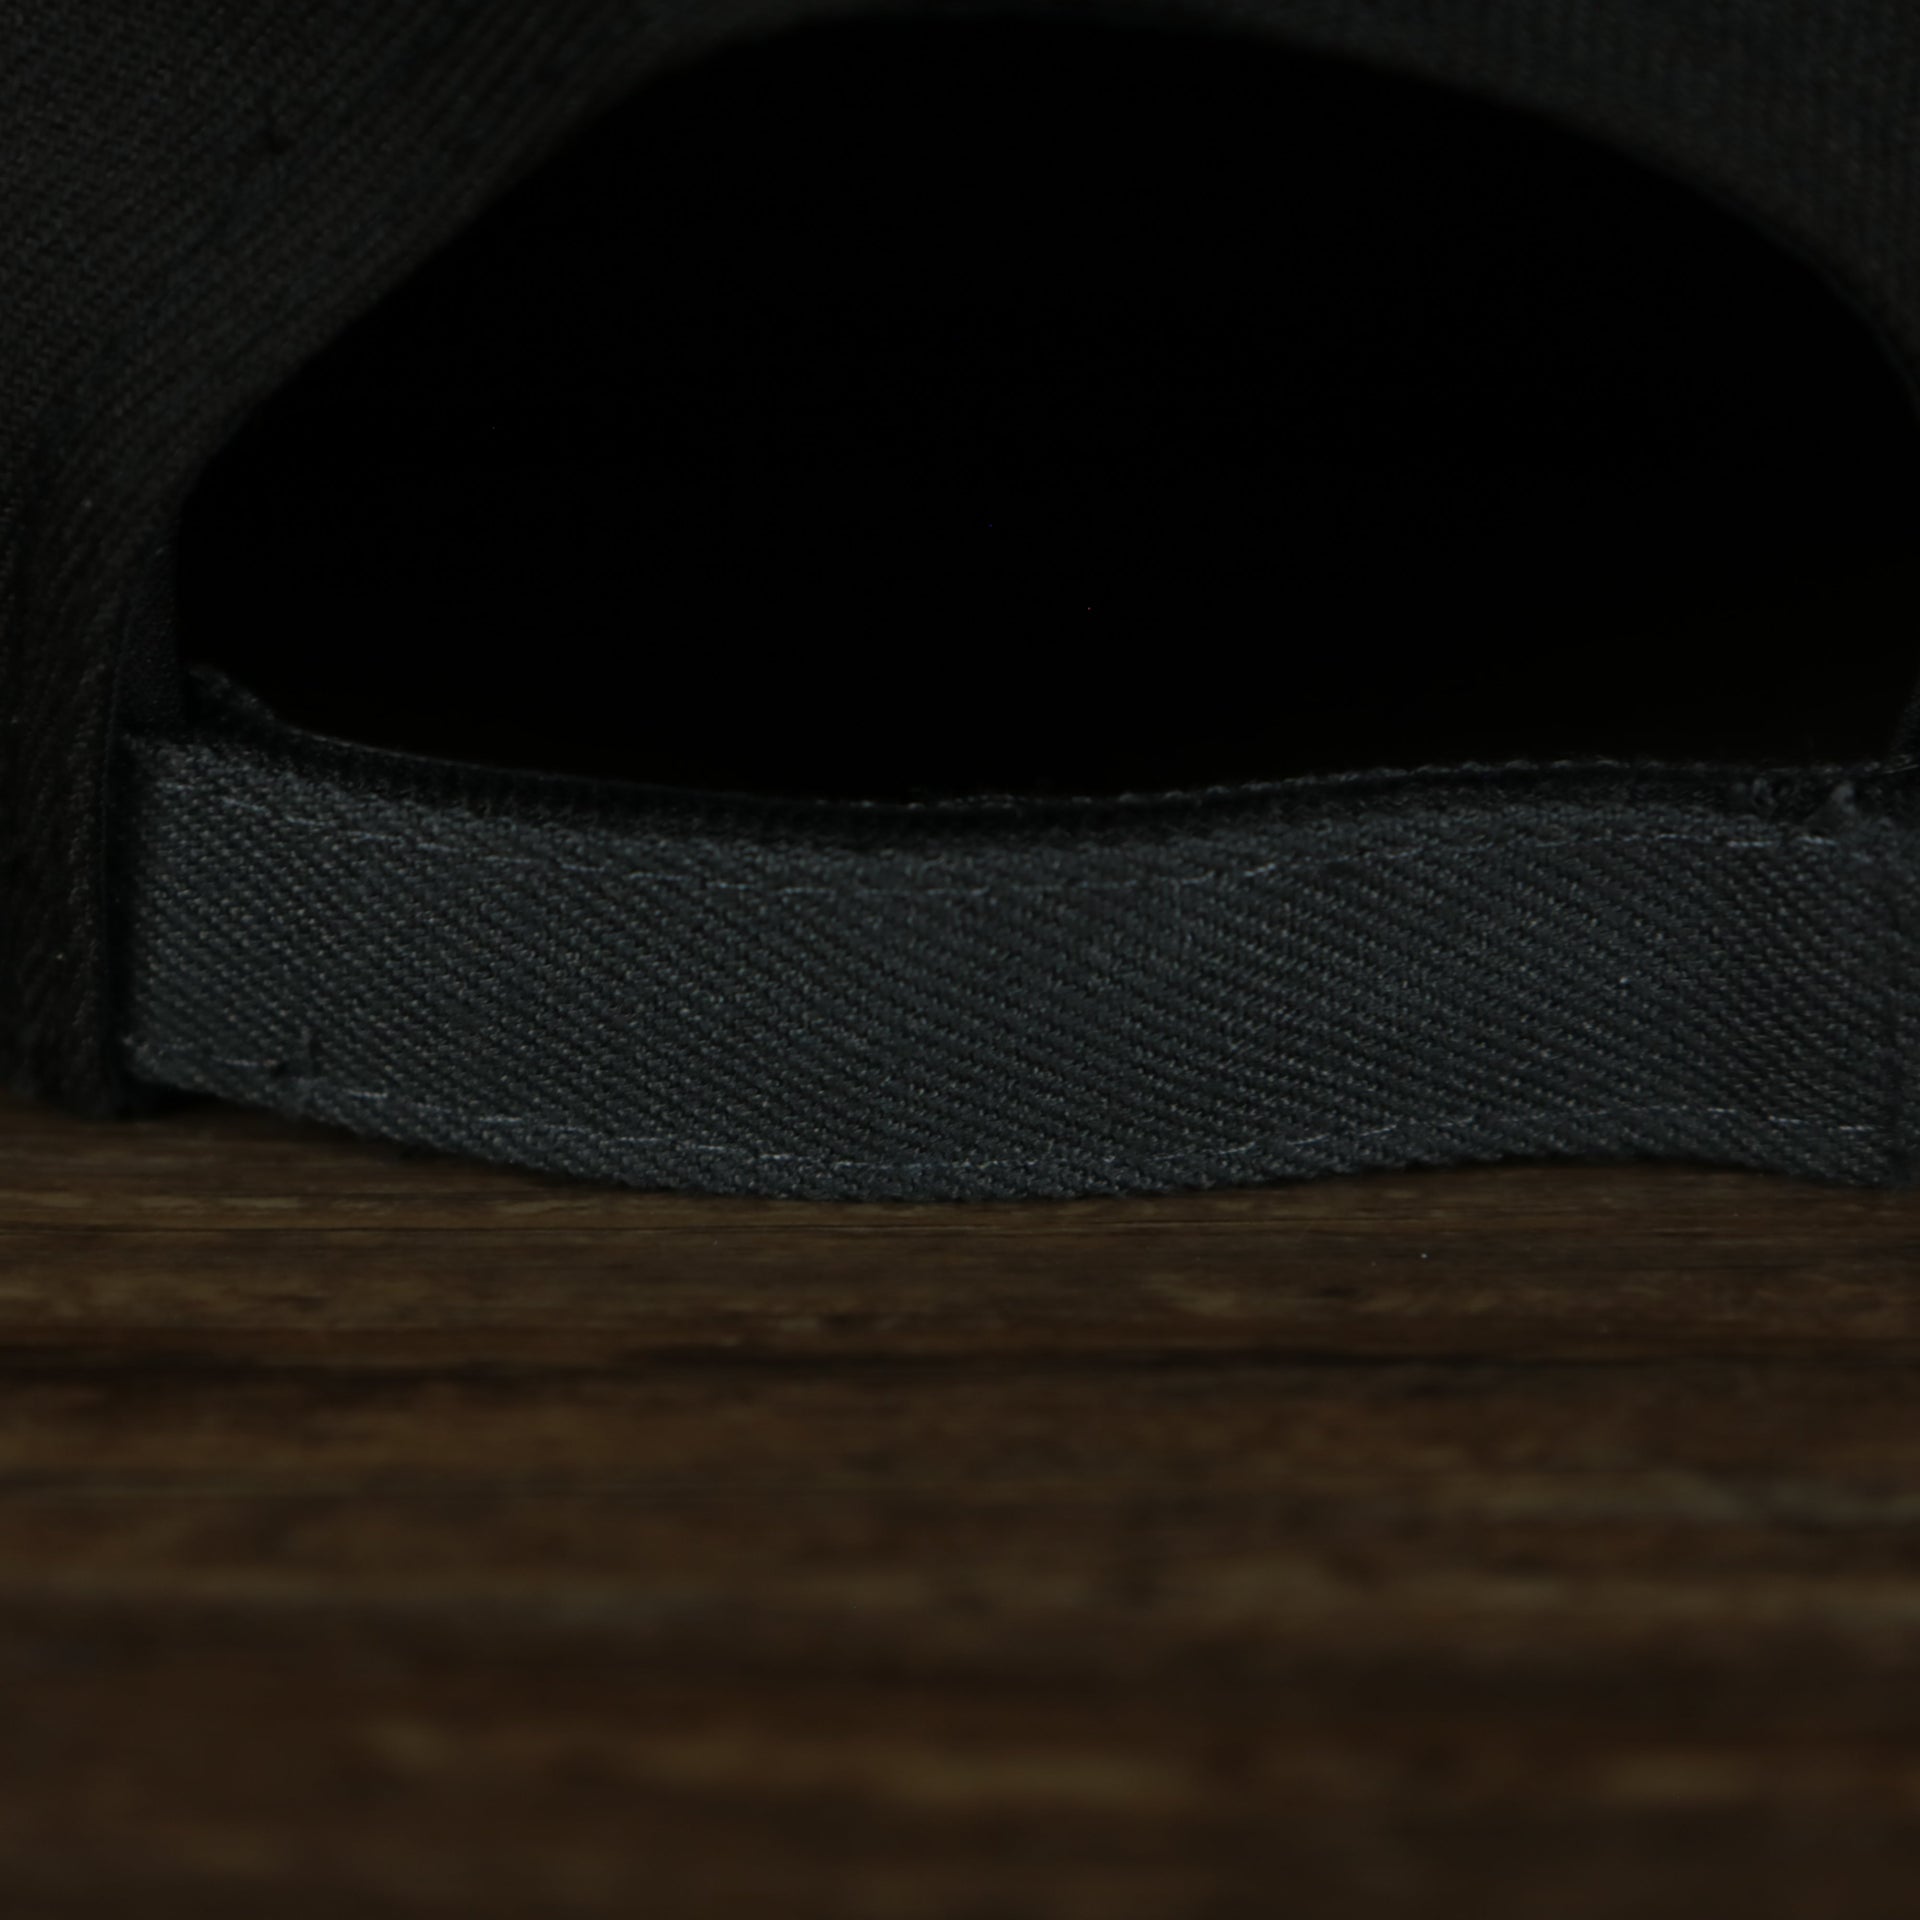 A close up of the velcro strap on the Brooklyn Nets My 1st 9Fifty Snapback